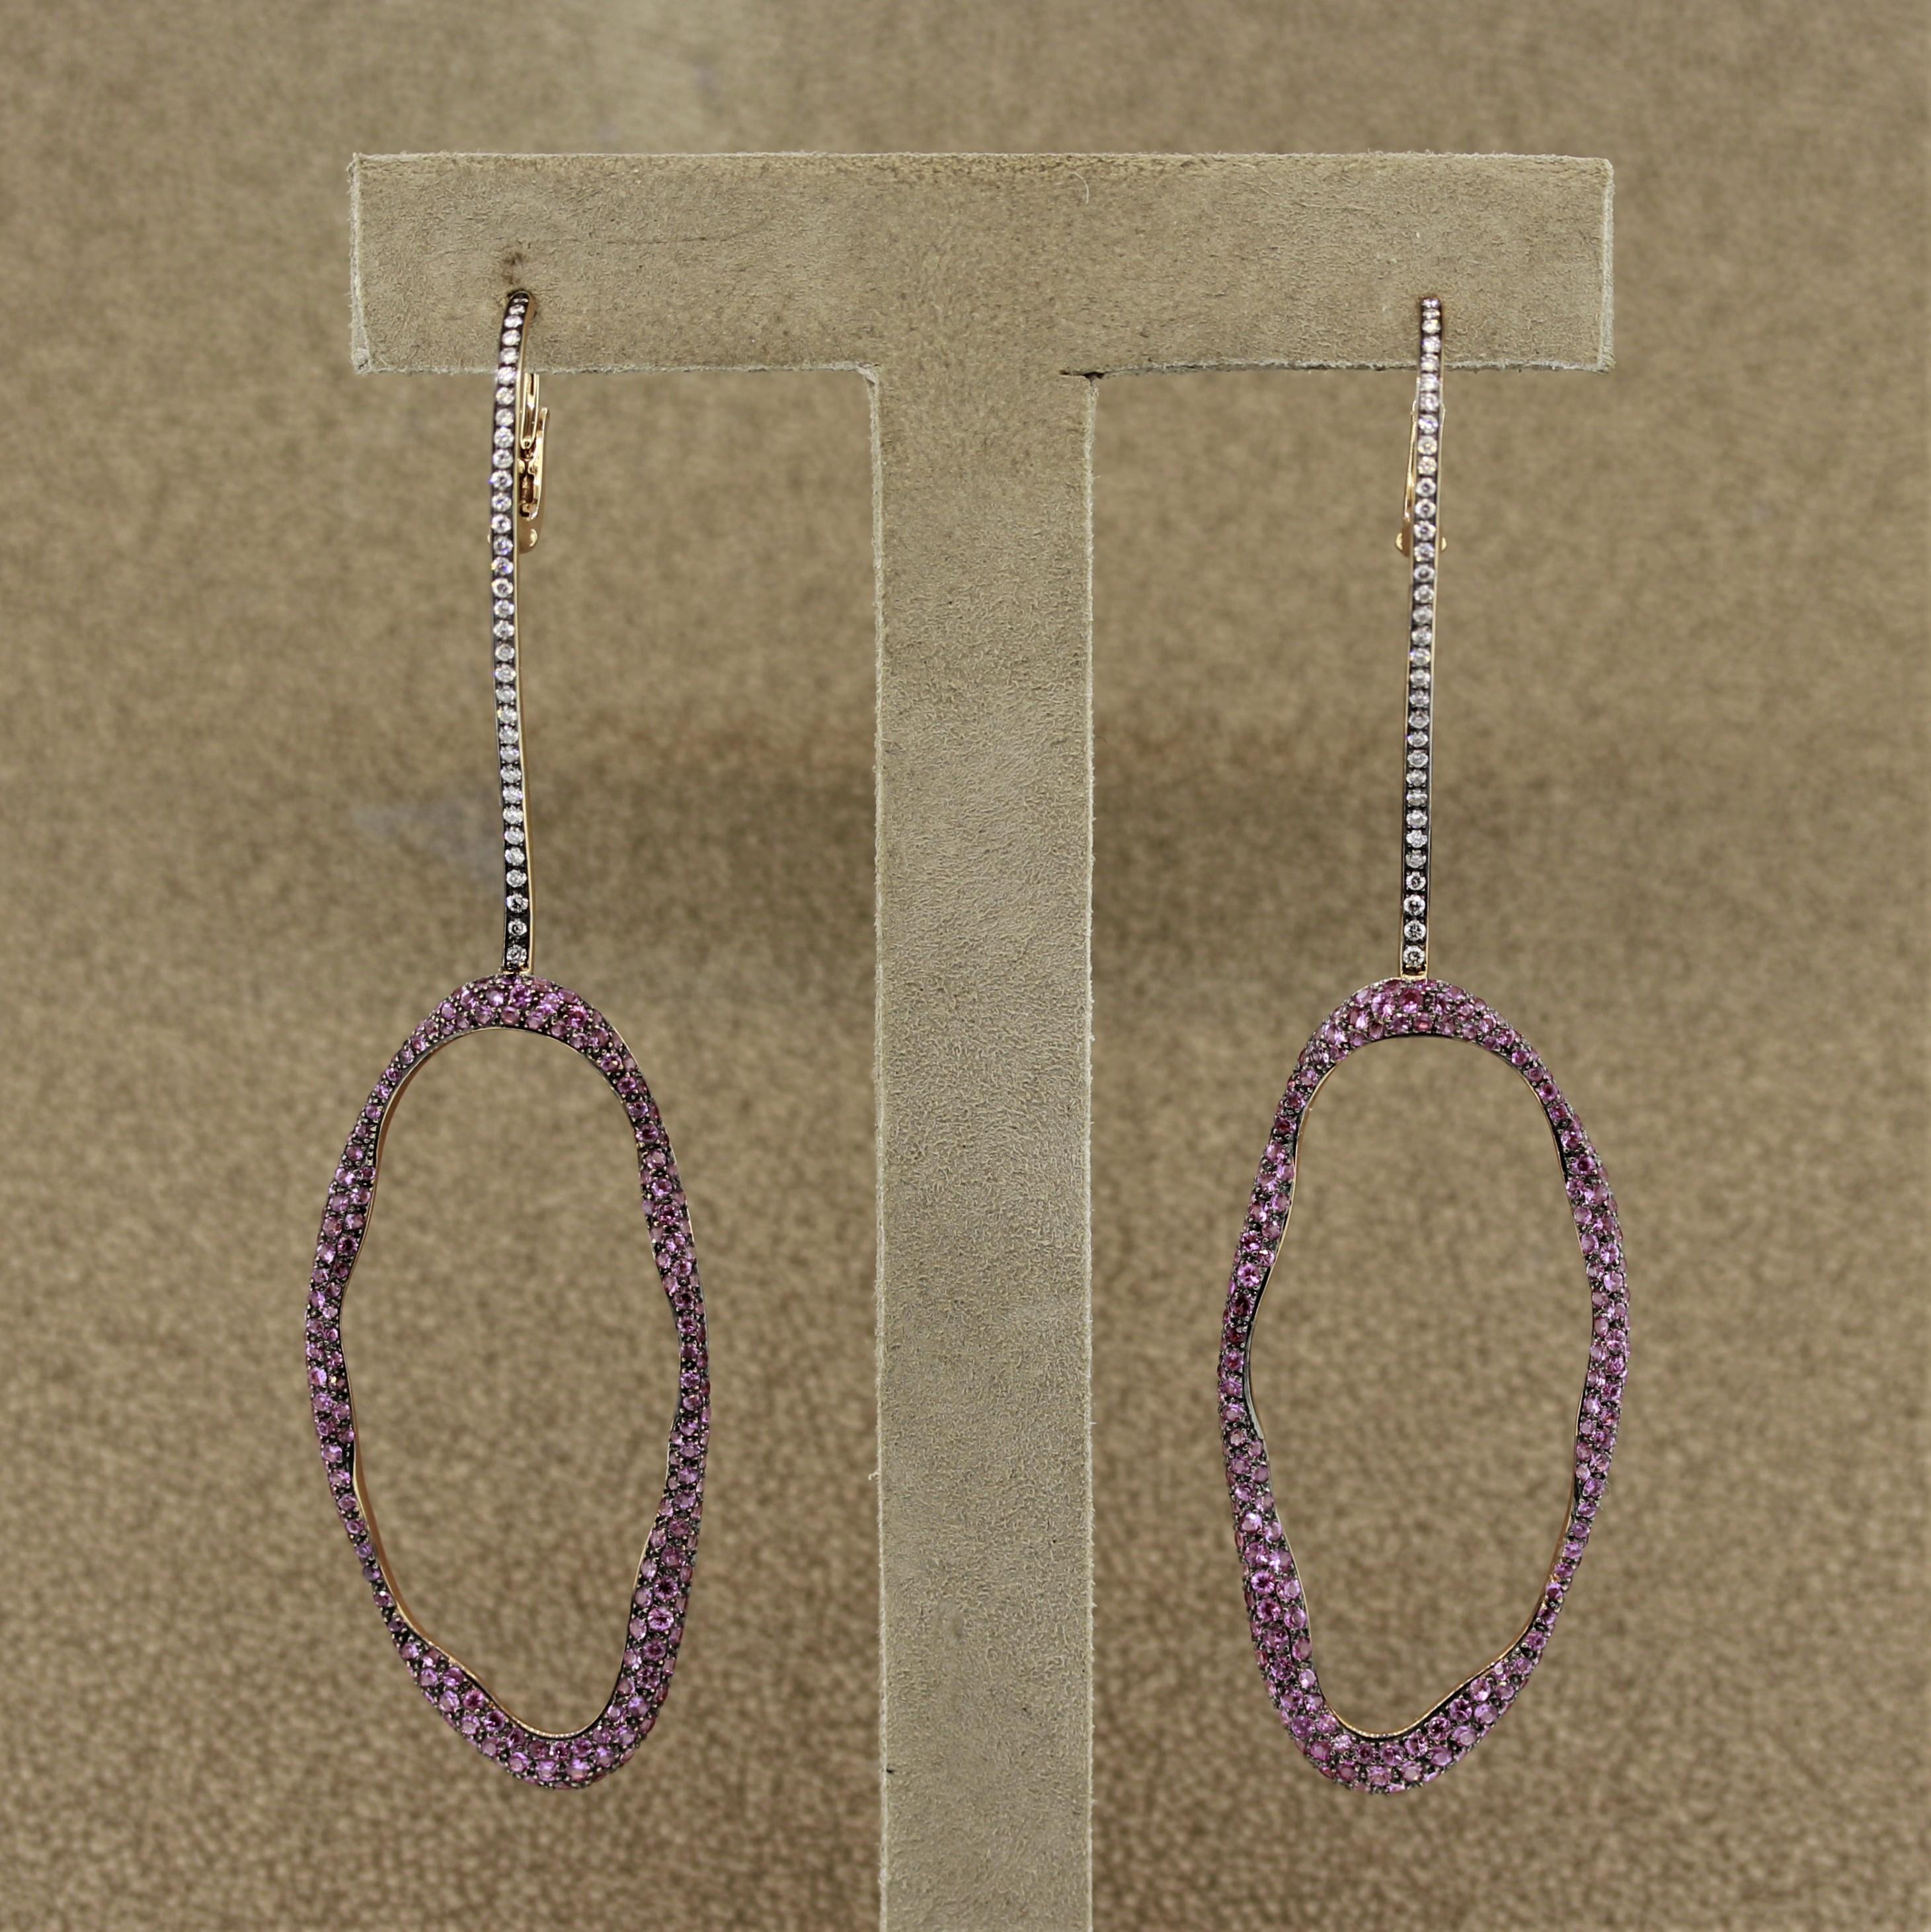 A fine pair of earrings featuring 3 carats of pink sapphire cut as round brilliants along with 0.70 carats of round brilliant cut diamonds. Made in 18k rose gold with a black rhodium finish on the top of the earrings.

Length: 3.4 inches